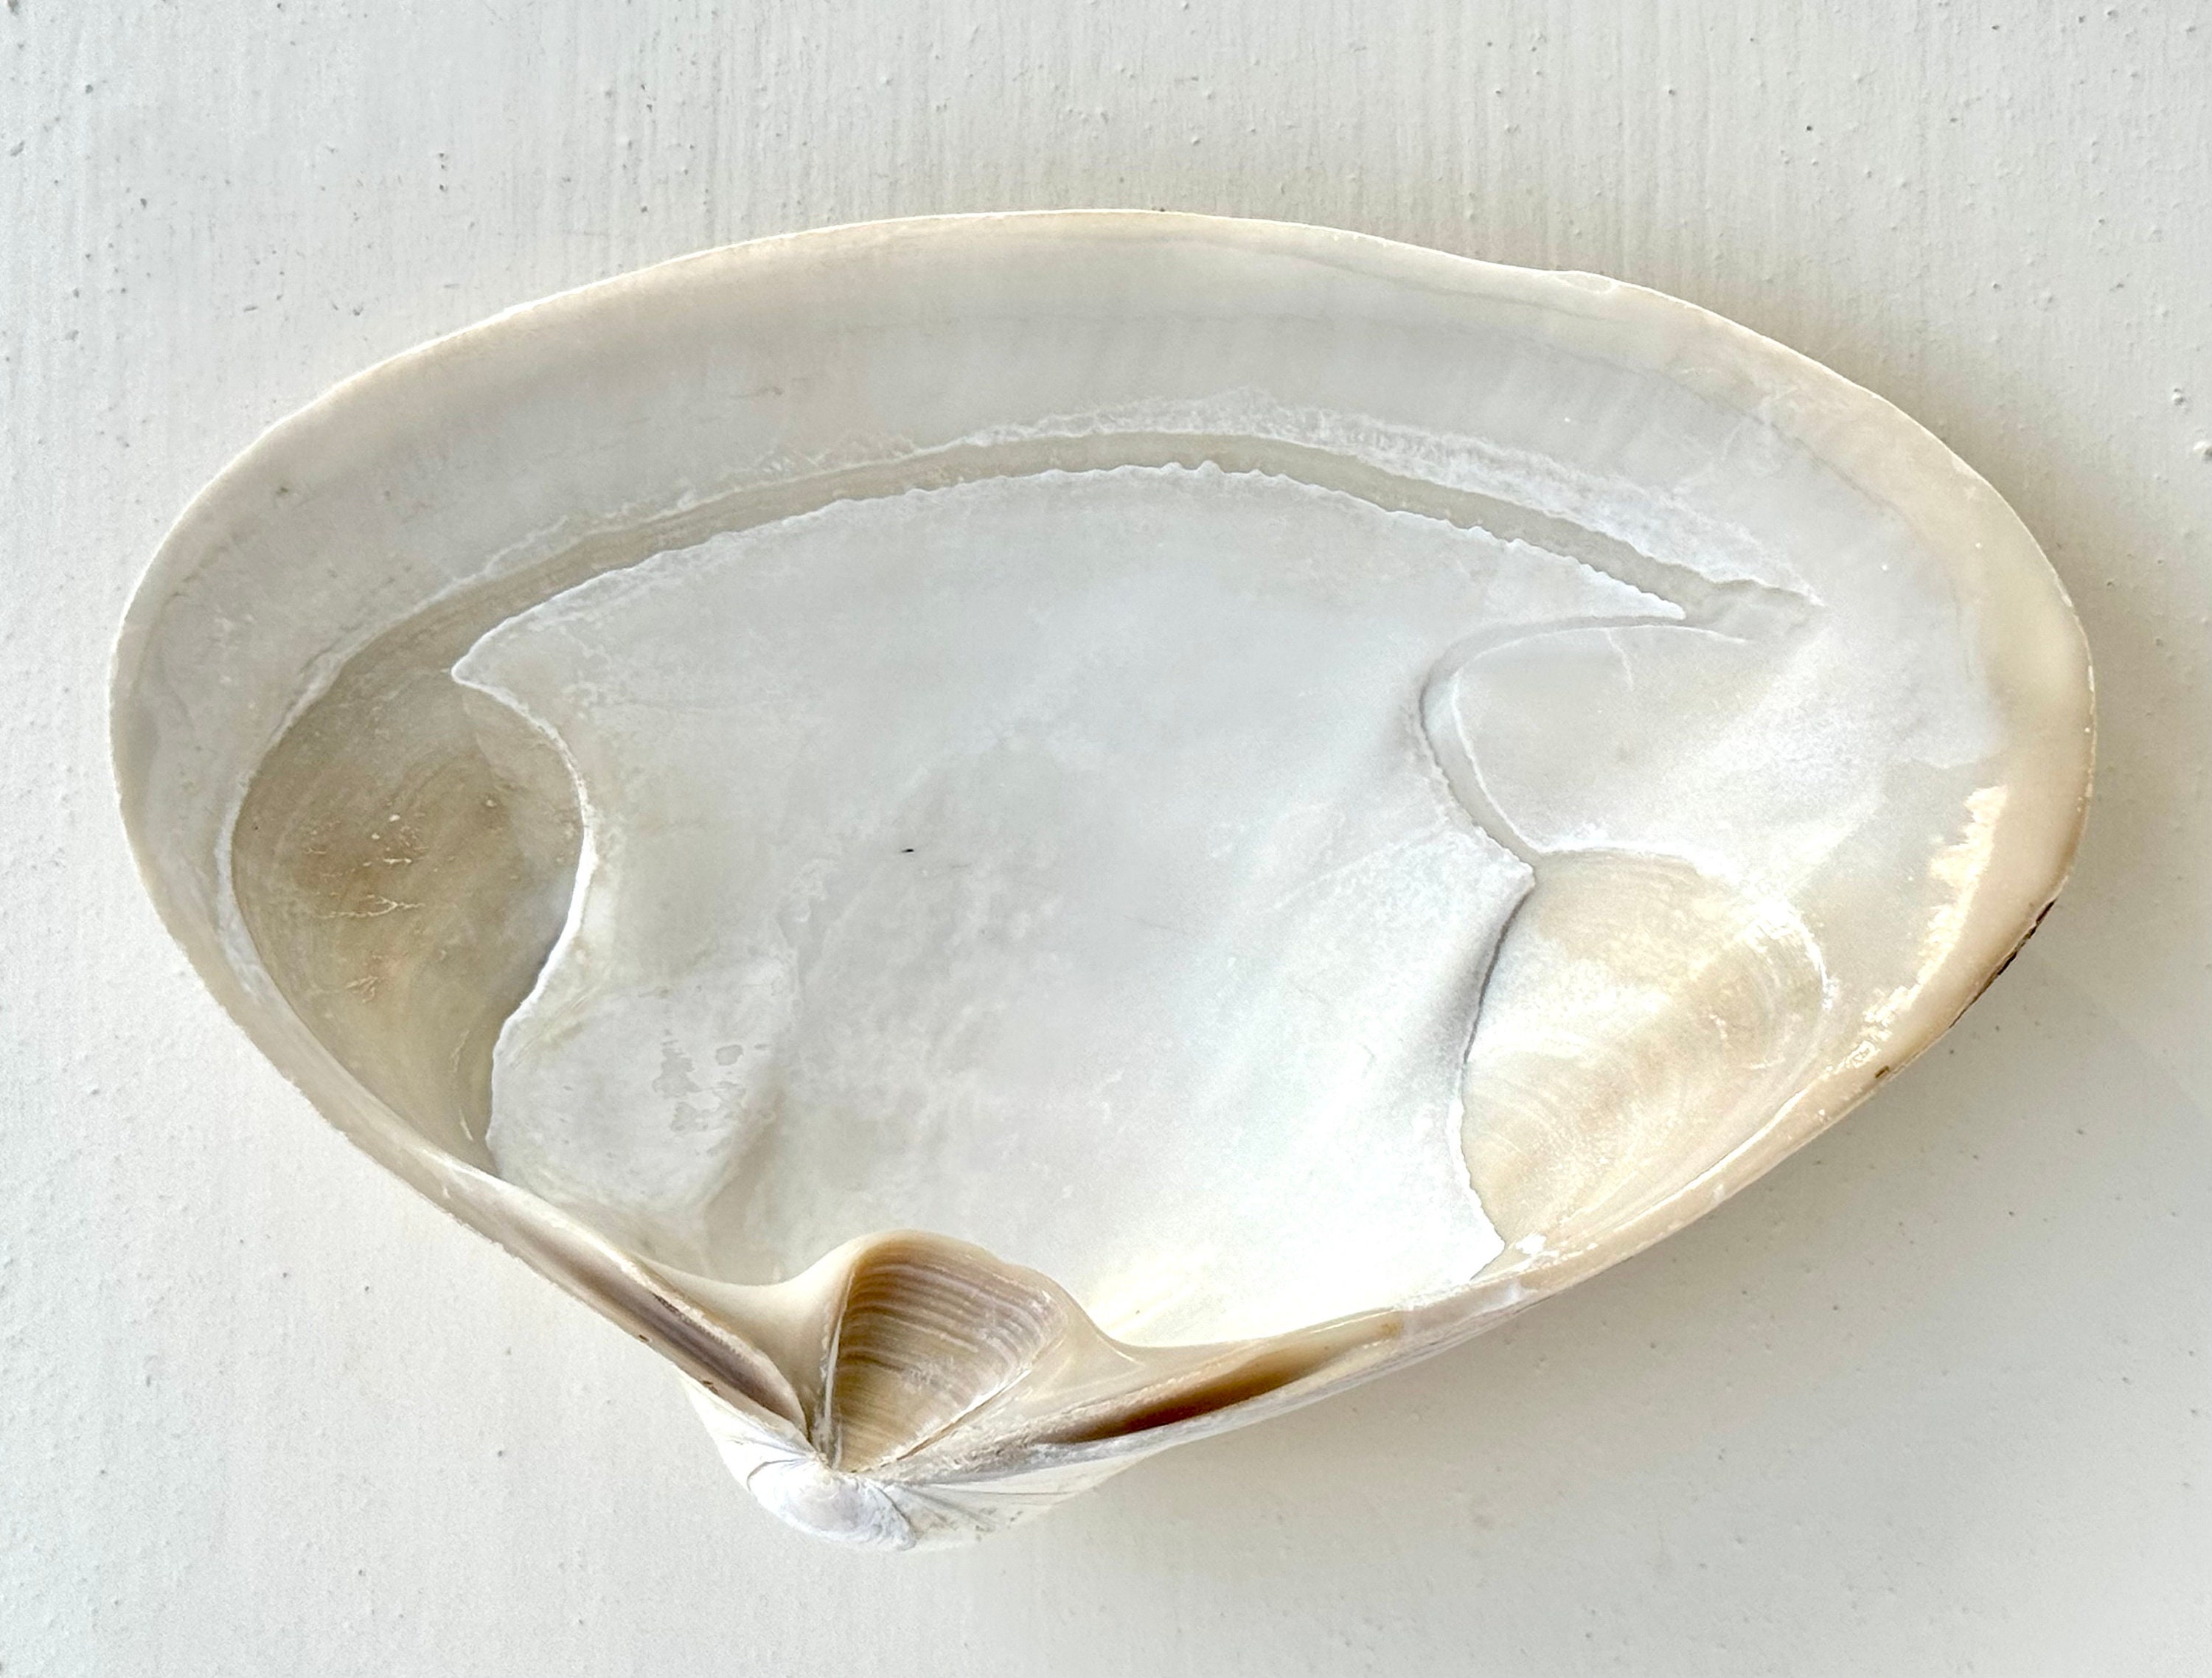 Speckled White Clam Shells - Clycymeris Pectunculus (approx. 1